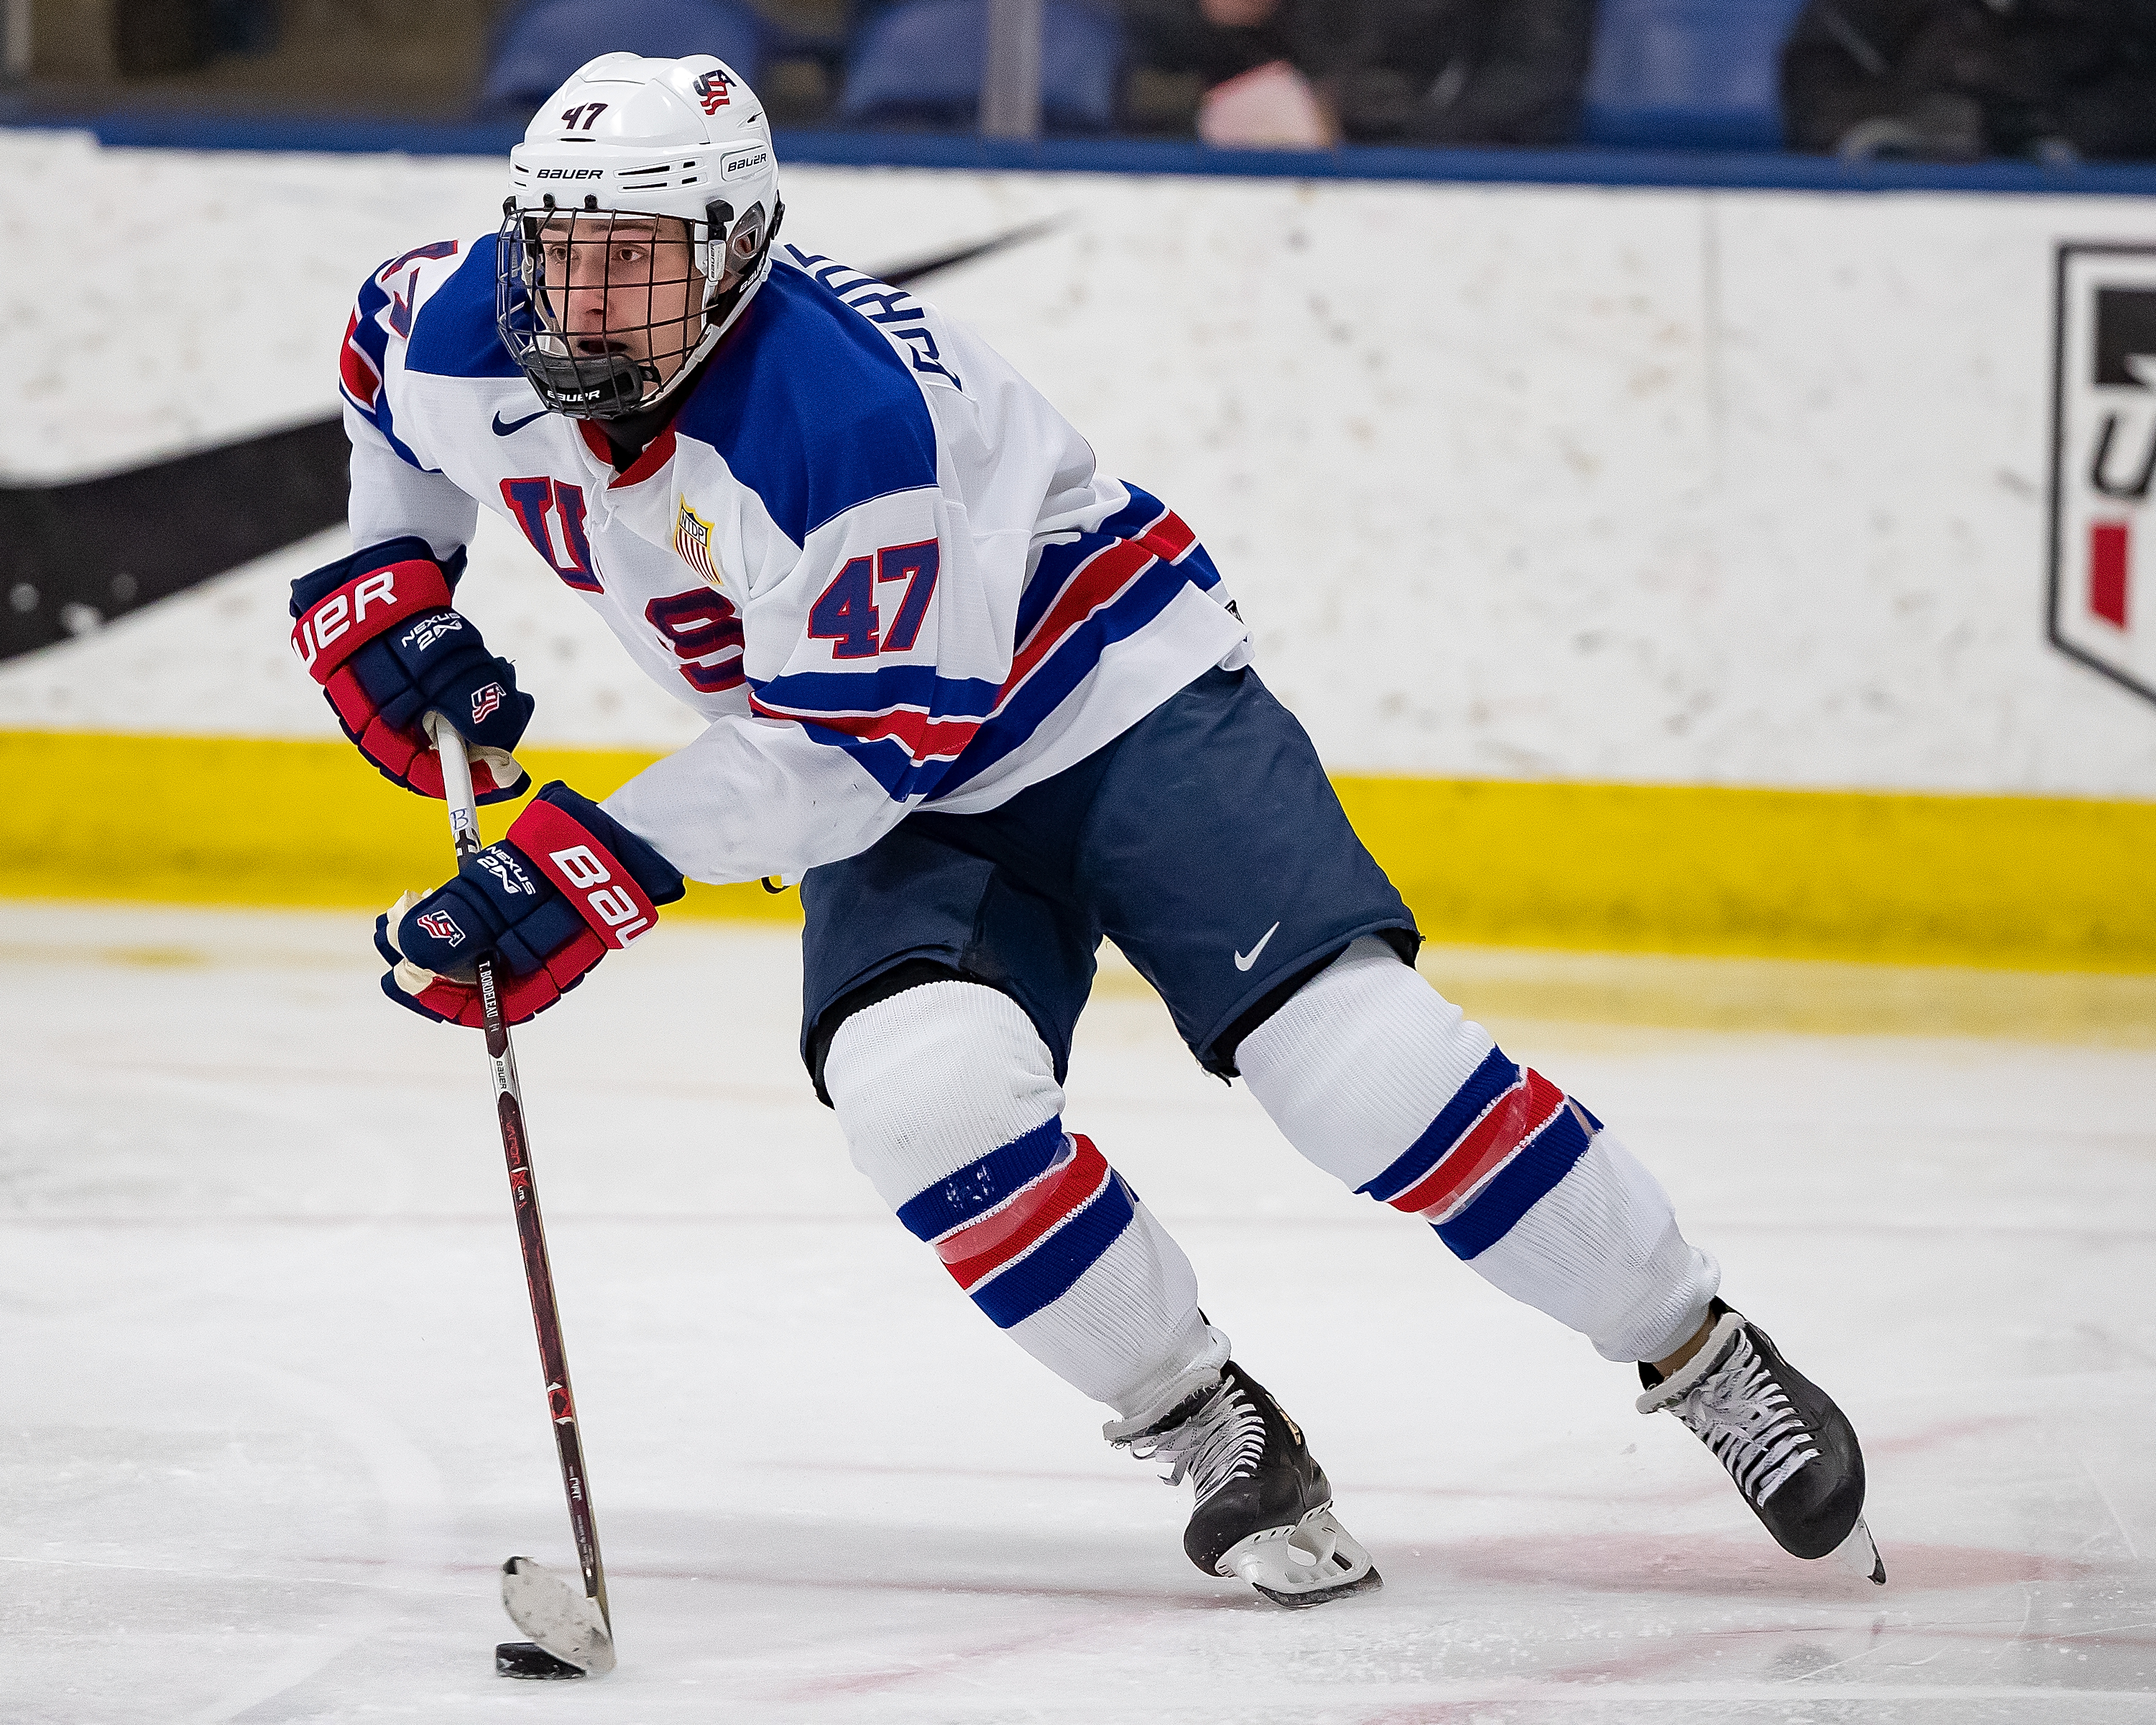 PLYMOUTH, MI - DECEMBER 11: Thomas Bordeleau #47 of the U.S. Nationals turns up ice with the puck against the Slovakia Nationals during game two of day one of the 2018 Under-17 Four Nations Tournament game at USA Hockey Arena on December 11, 2018 in Plymouth, Michigan. USA defeated Slovakia 7-2.